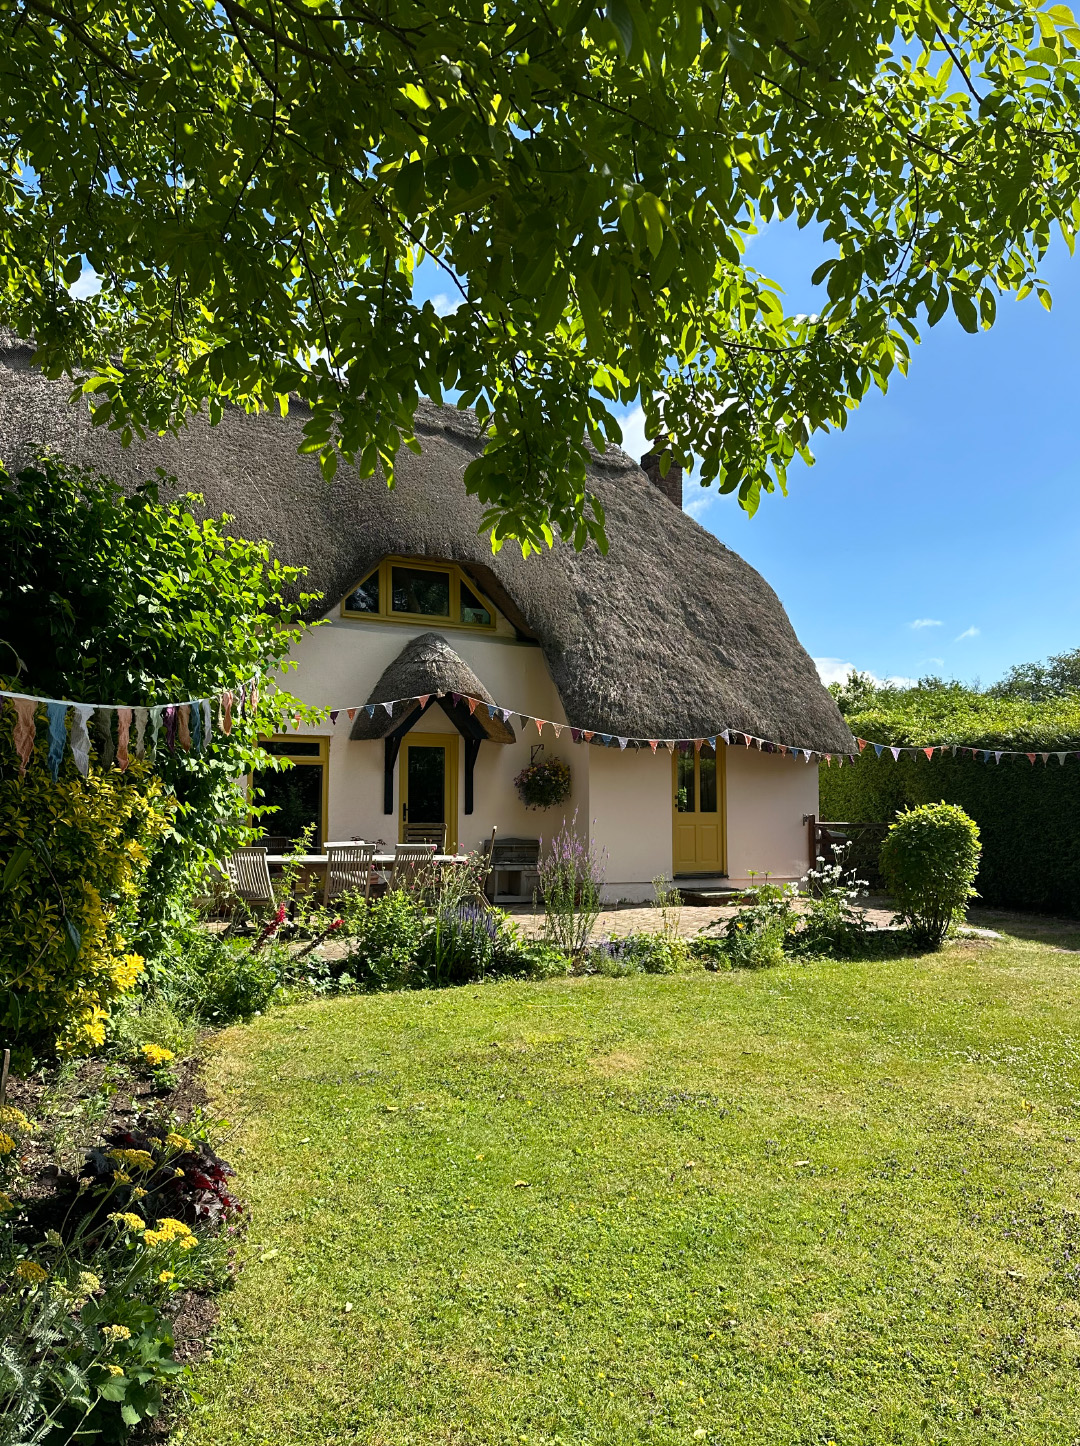 The Otto House Thatched Cottage